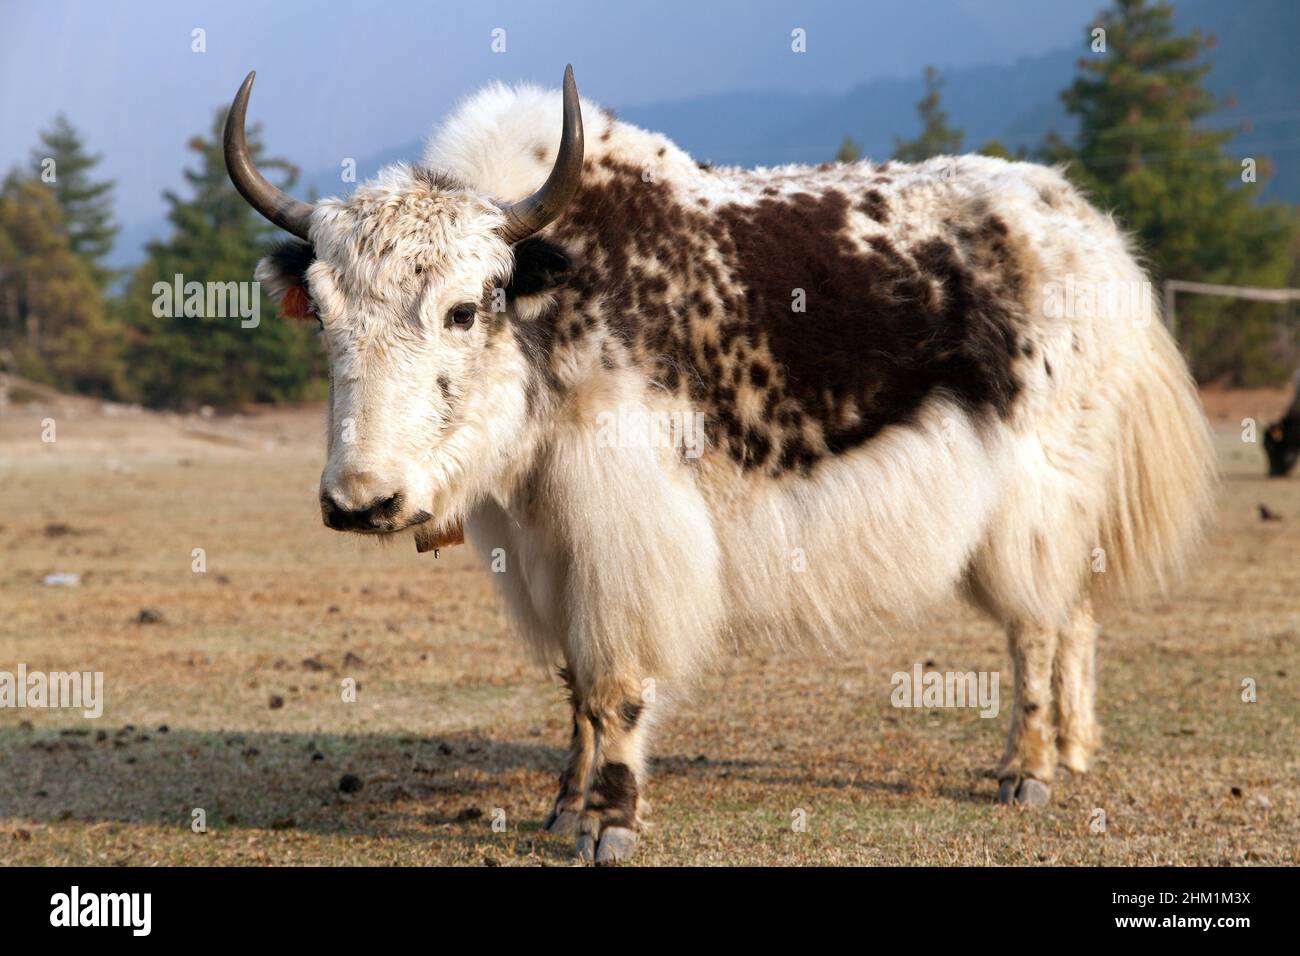 View of white and Brown yak on meadow Stock Photo